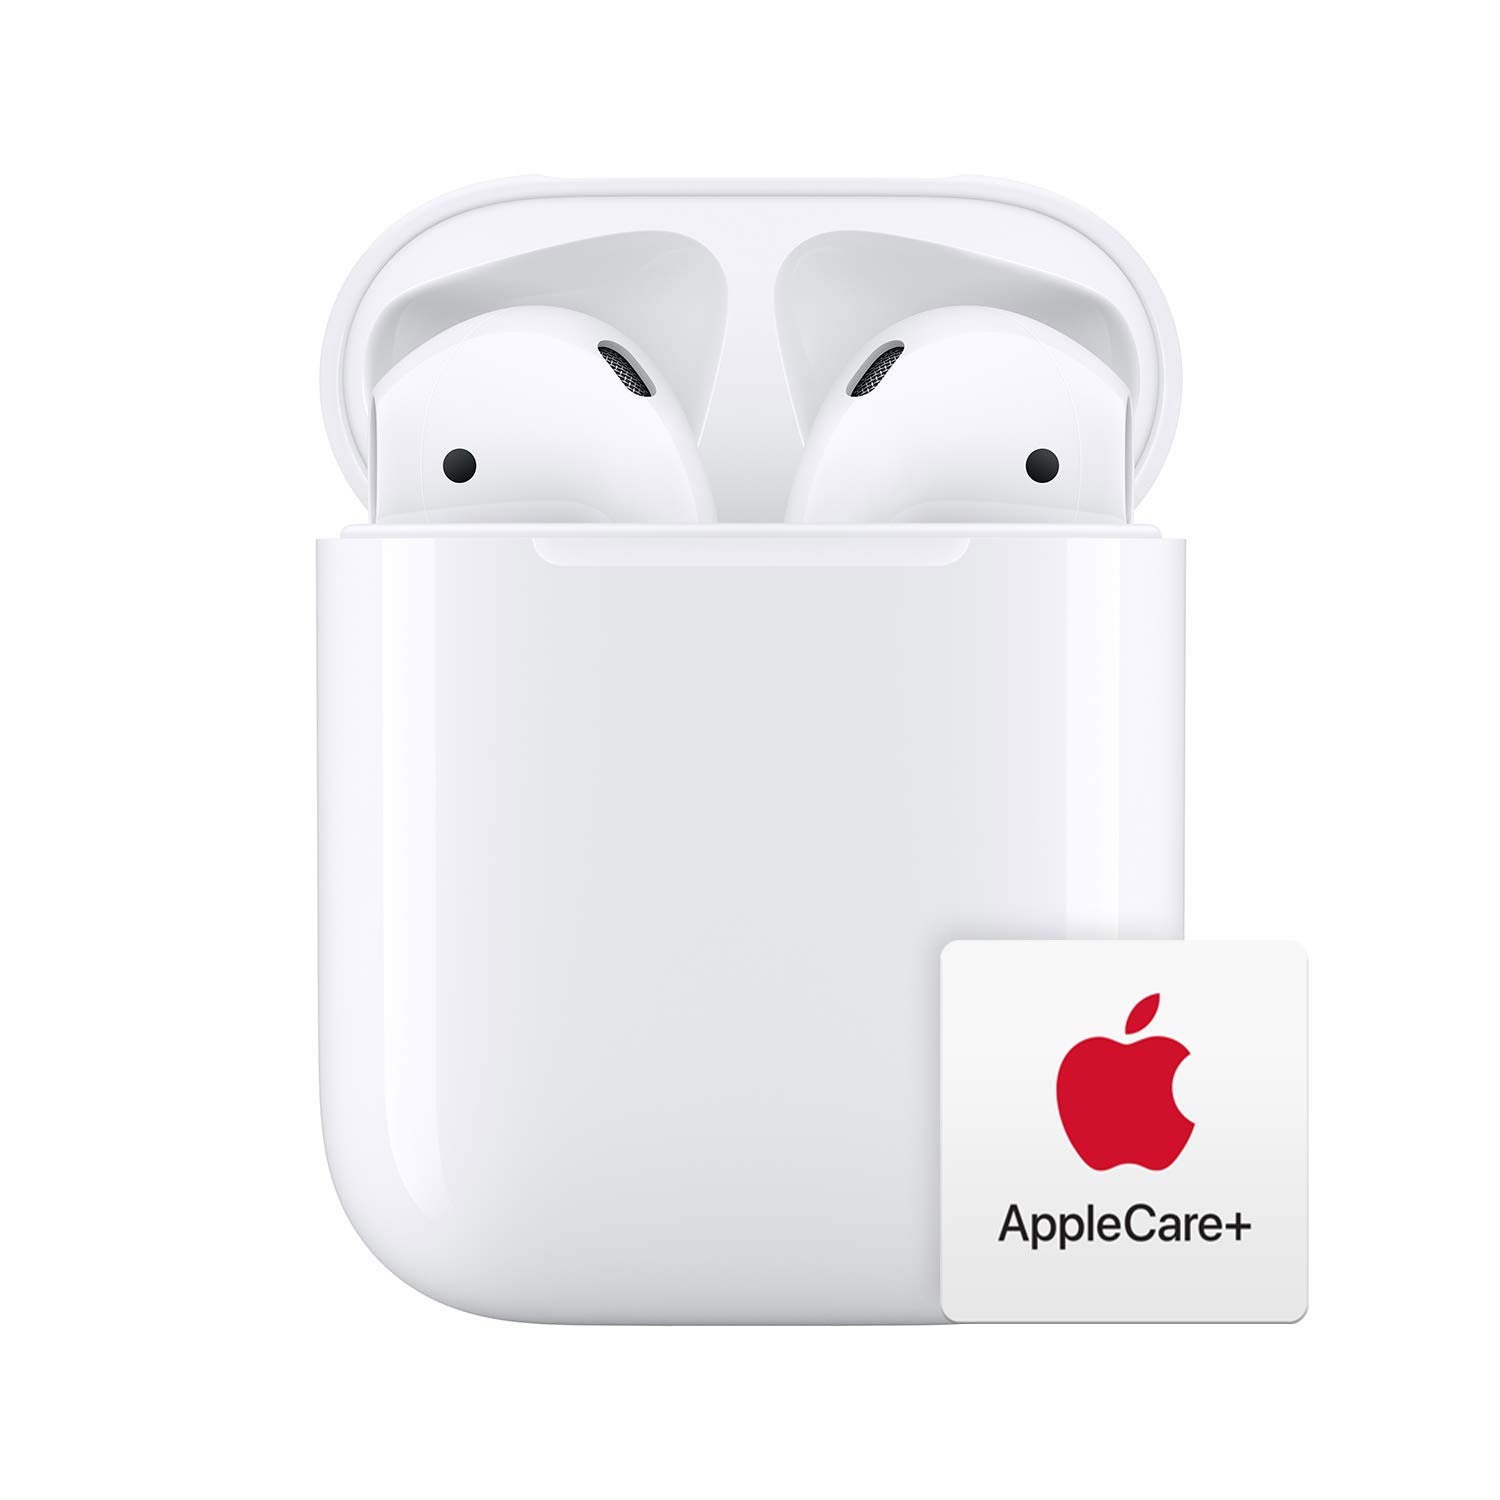 Apple AirPods (2. Generation) mit Lightning-Ladecase mit Care+